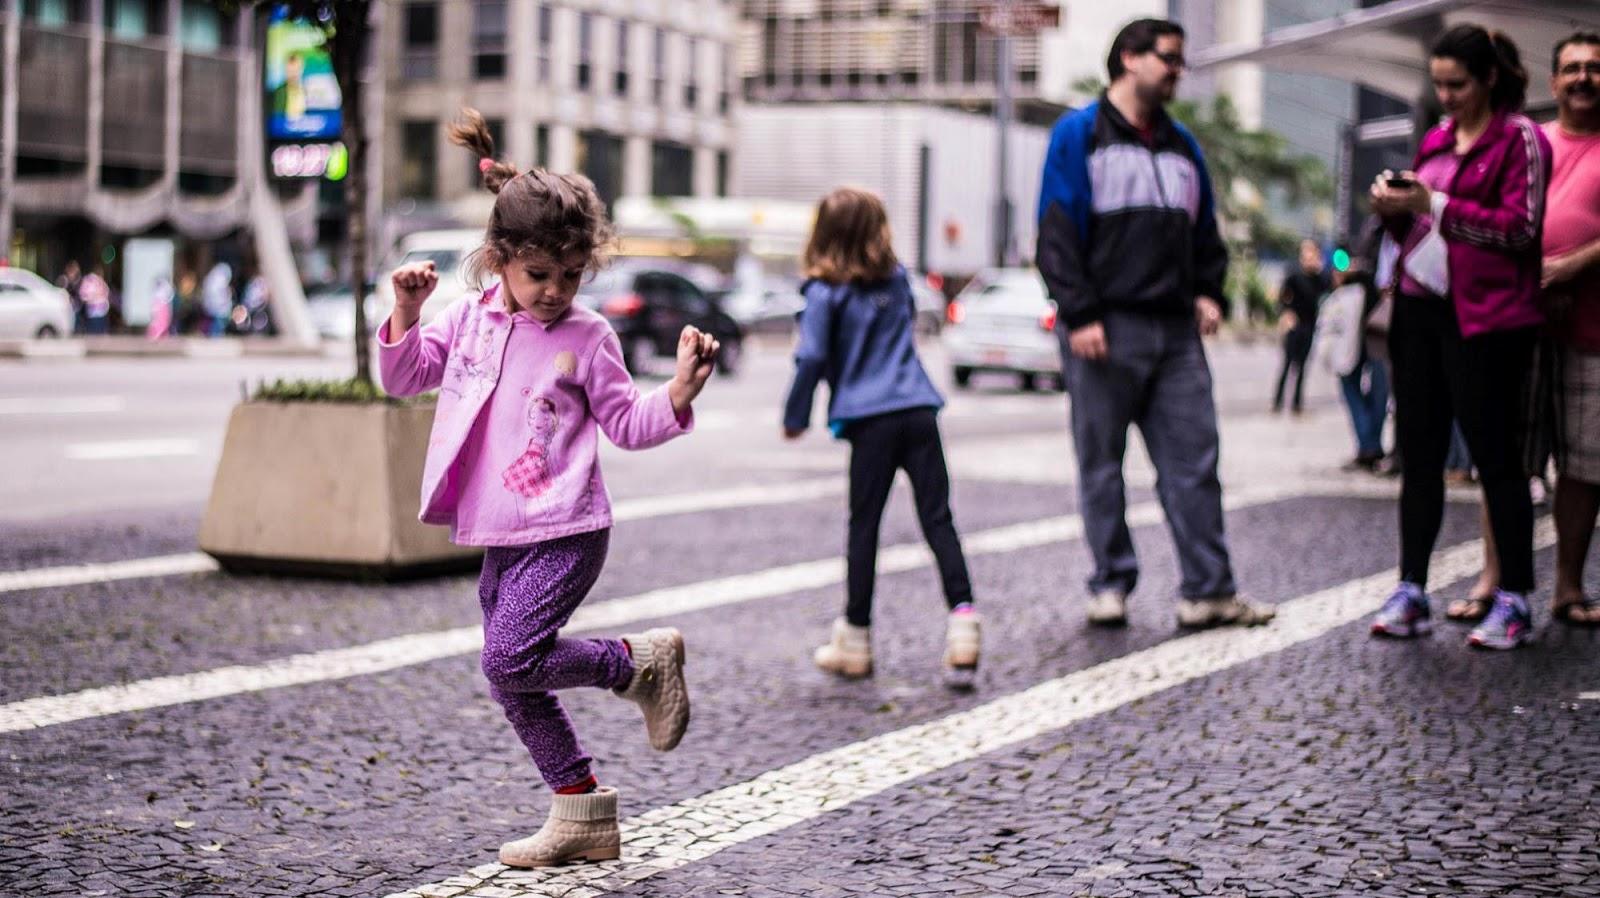 Guest Blog: Sam Williams discusses the benefits of child-friendly urban planning